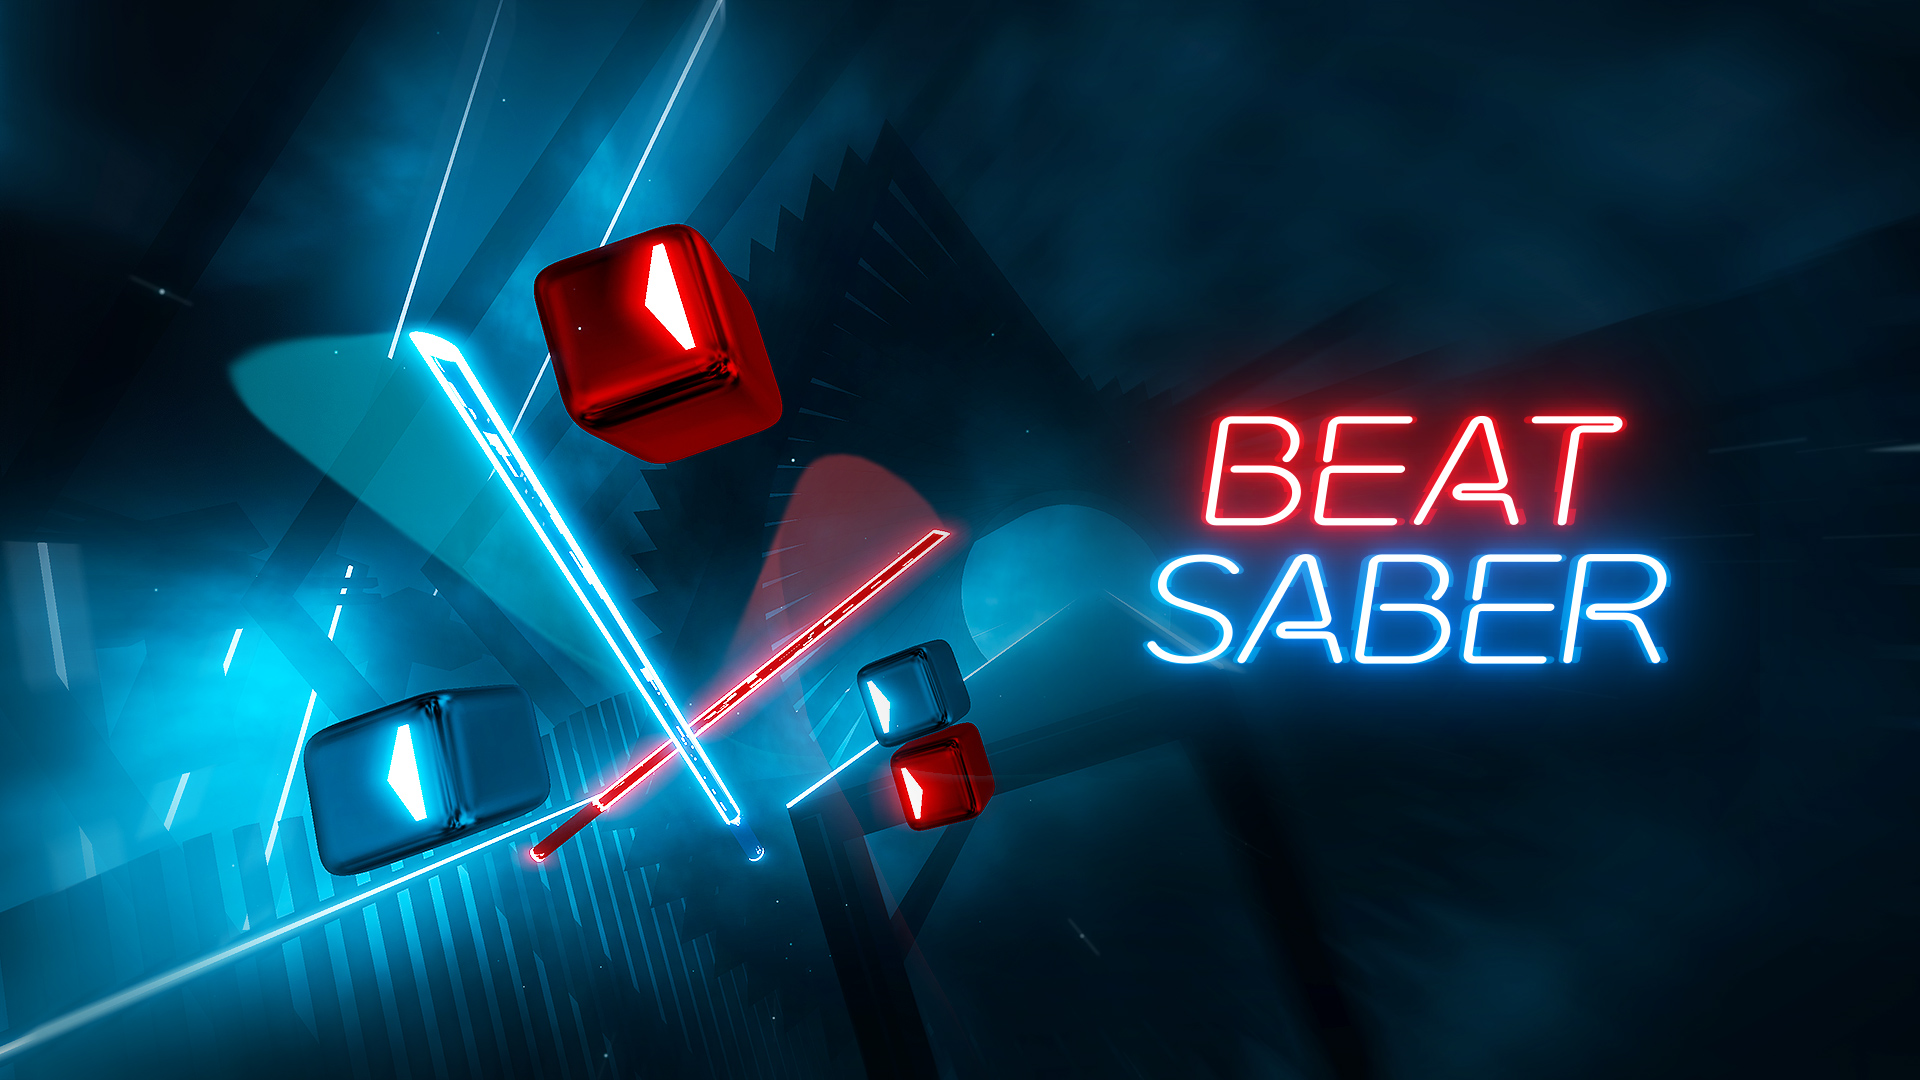 A promotional image from Beat Saber showing neon-lit logo and lasers sabers with blocks which is illustrative of the gameplay